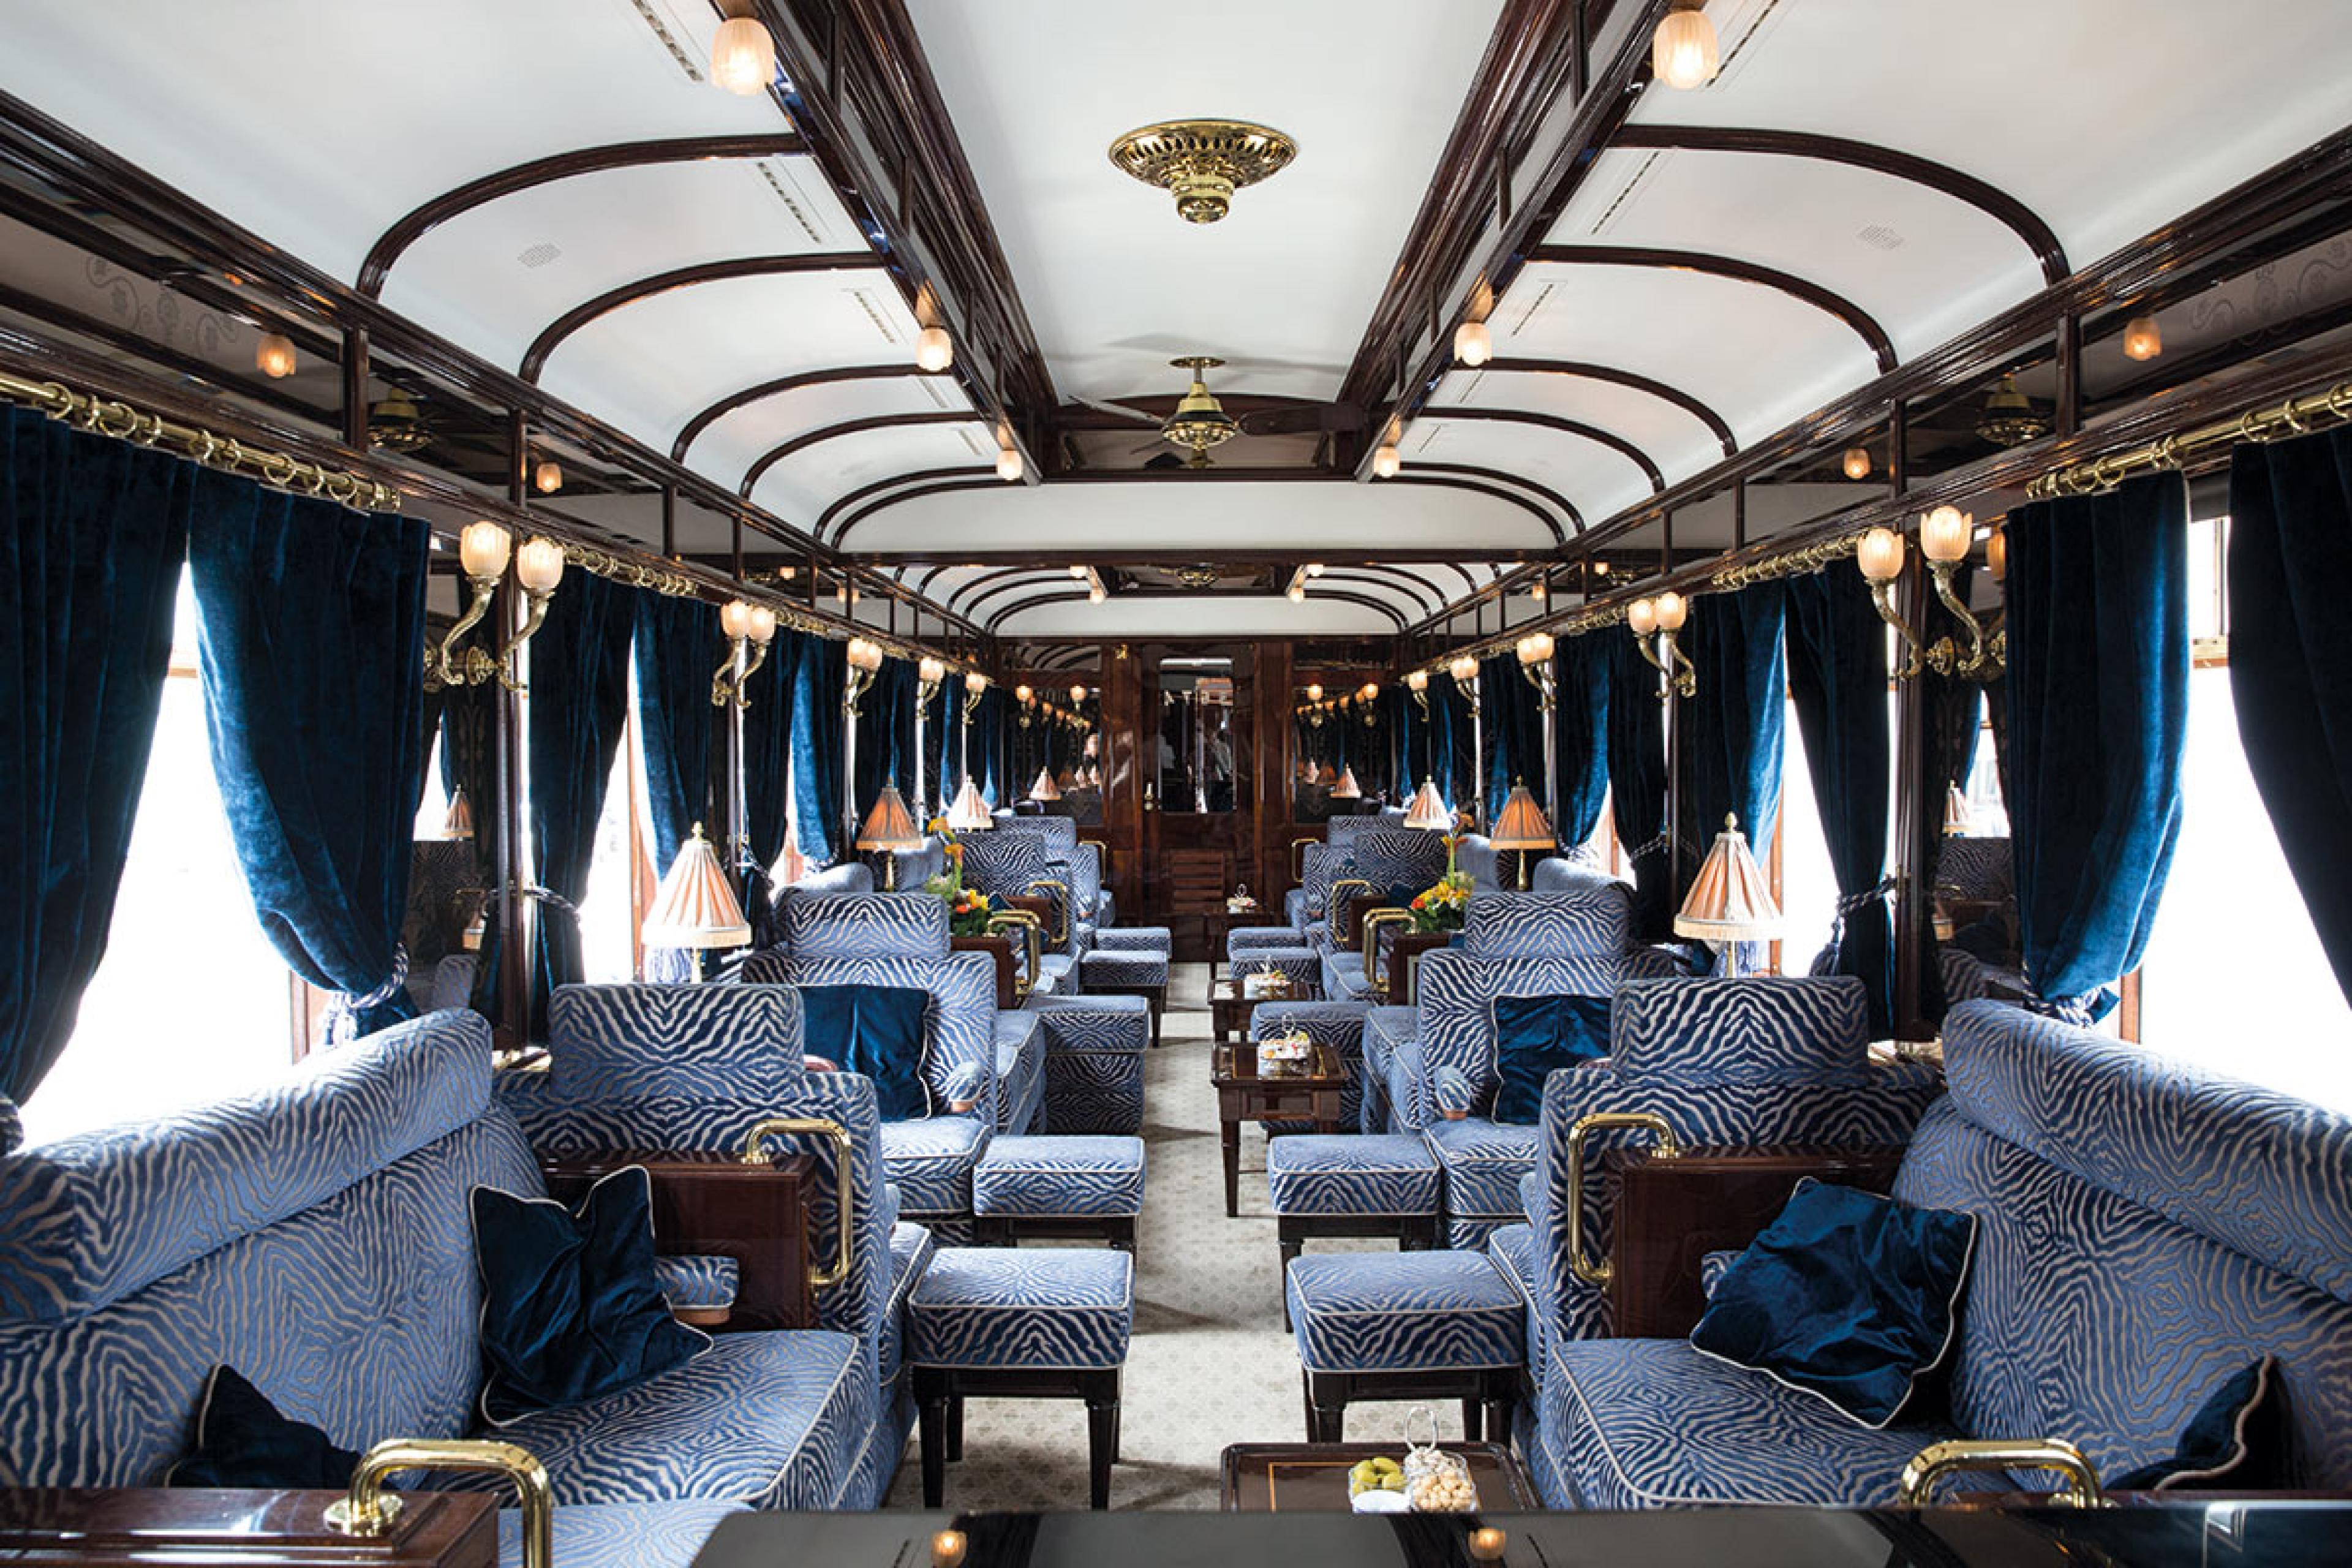 luxurious train lounge car in art deco style